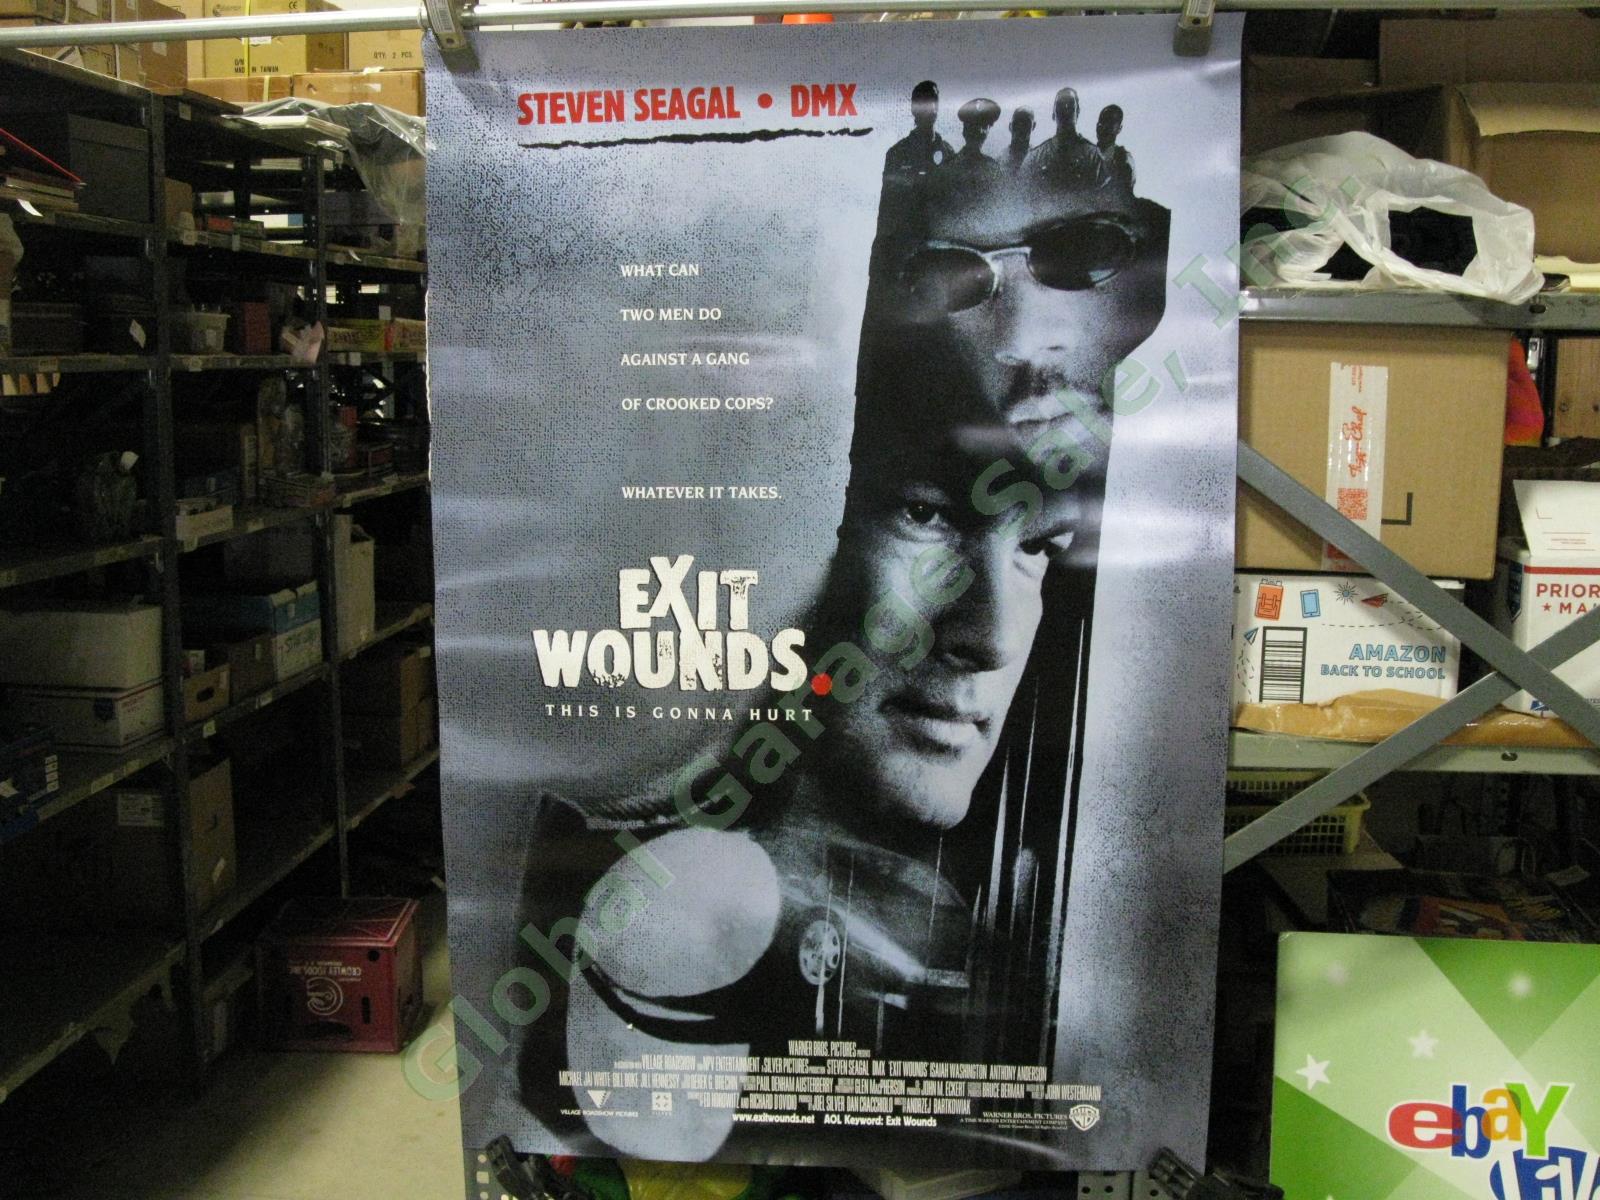 Exit Wounds Original Movie Theater Lobby Promo Poster DMX Steven Seagal Police